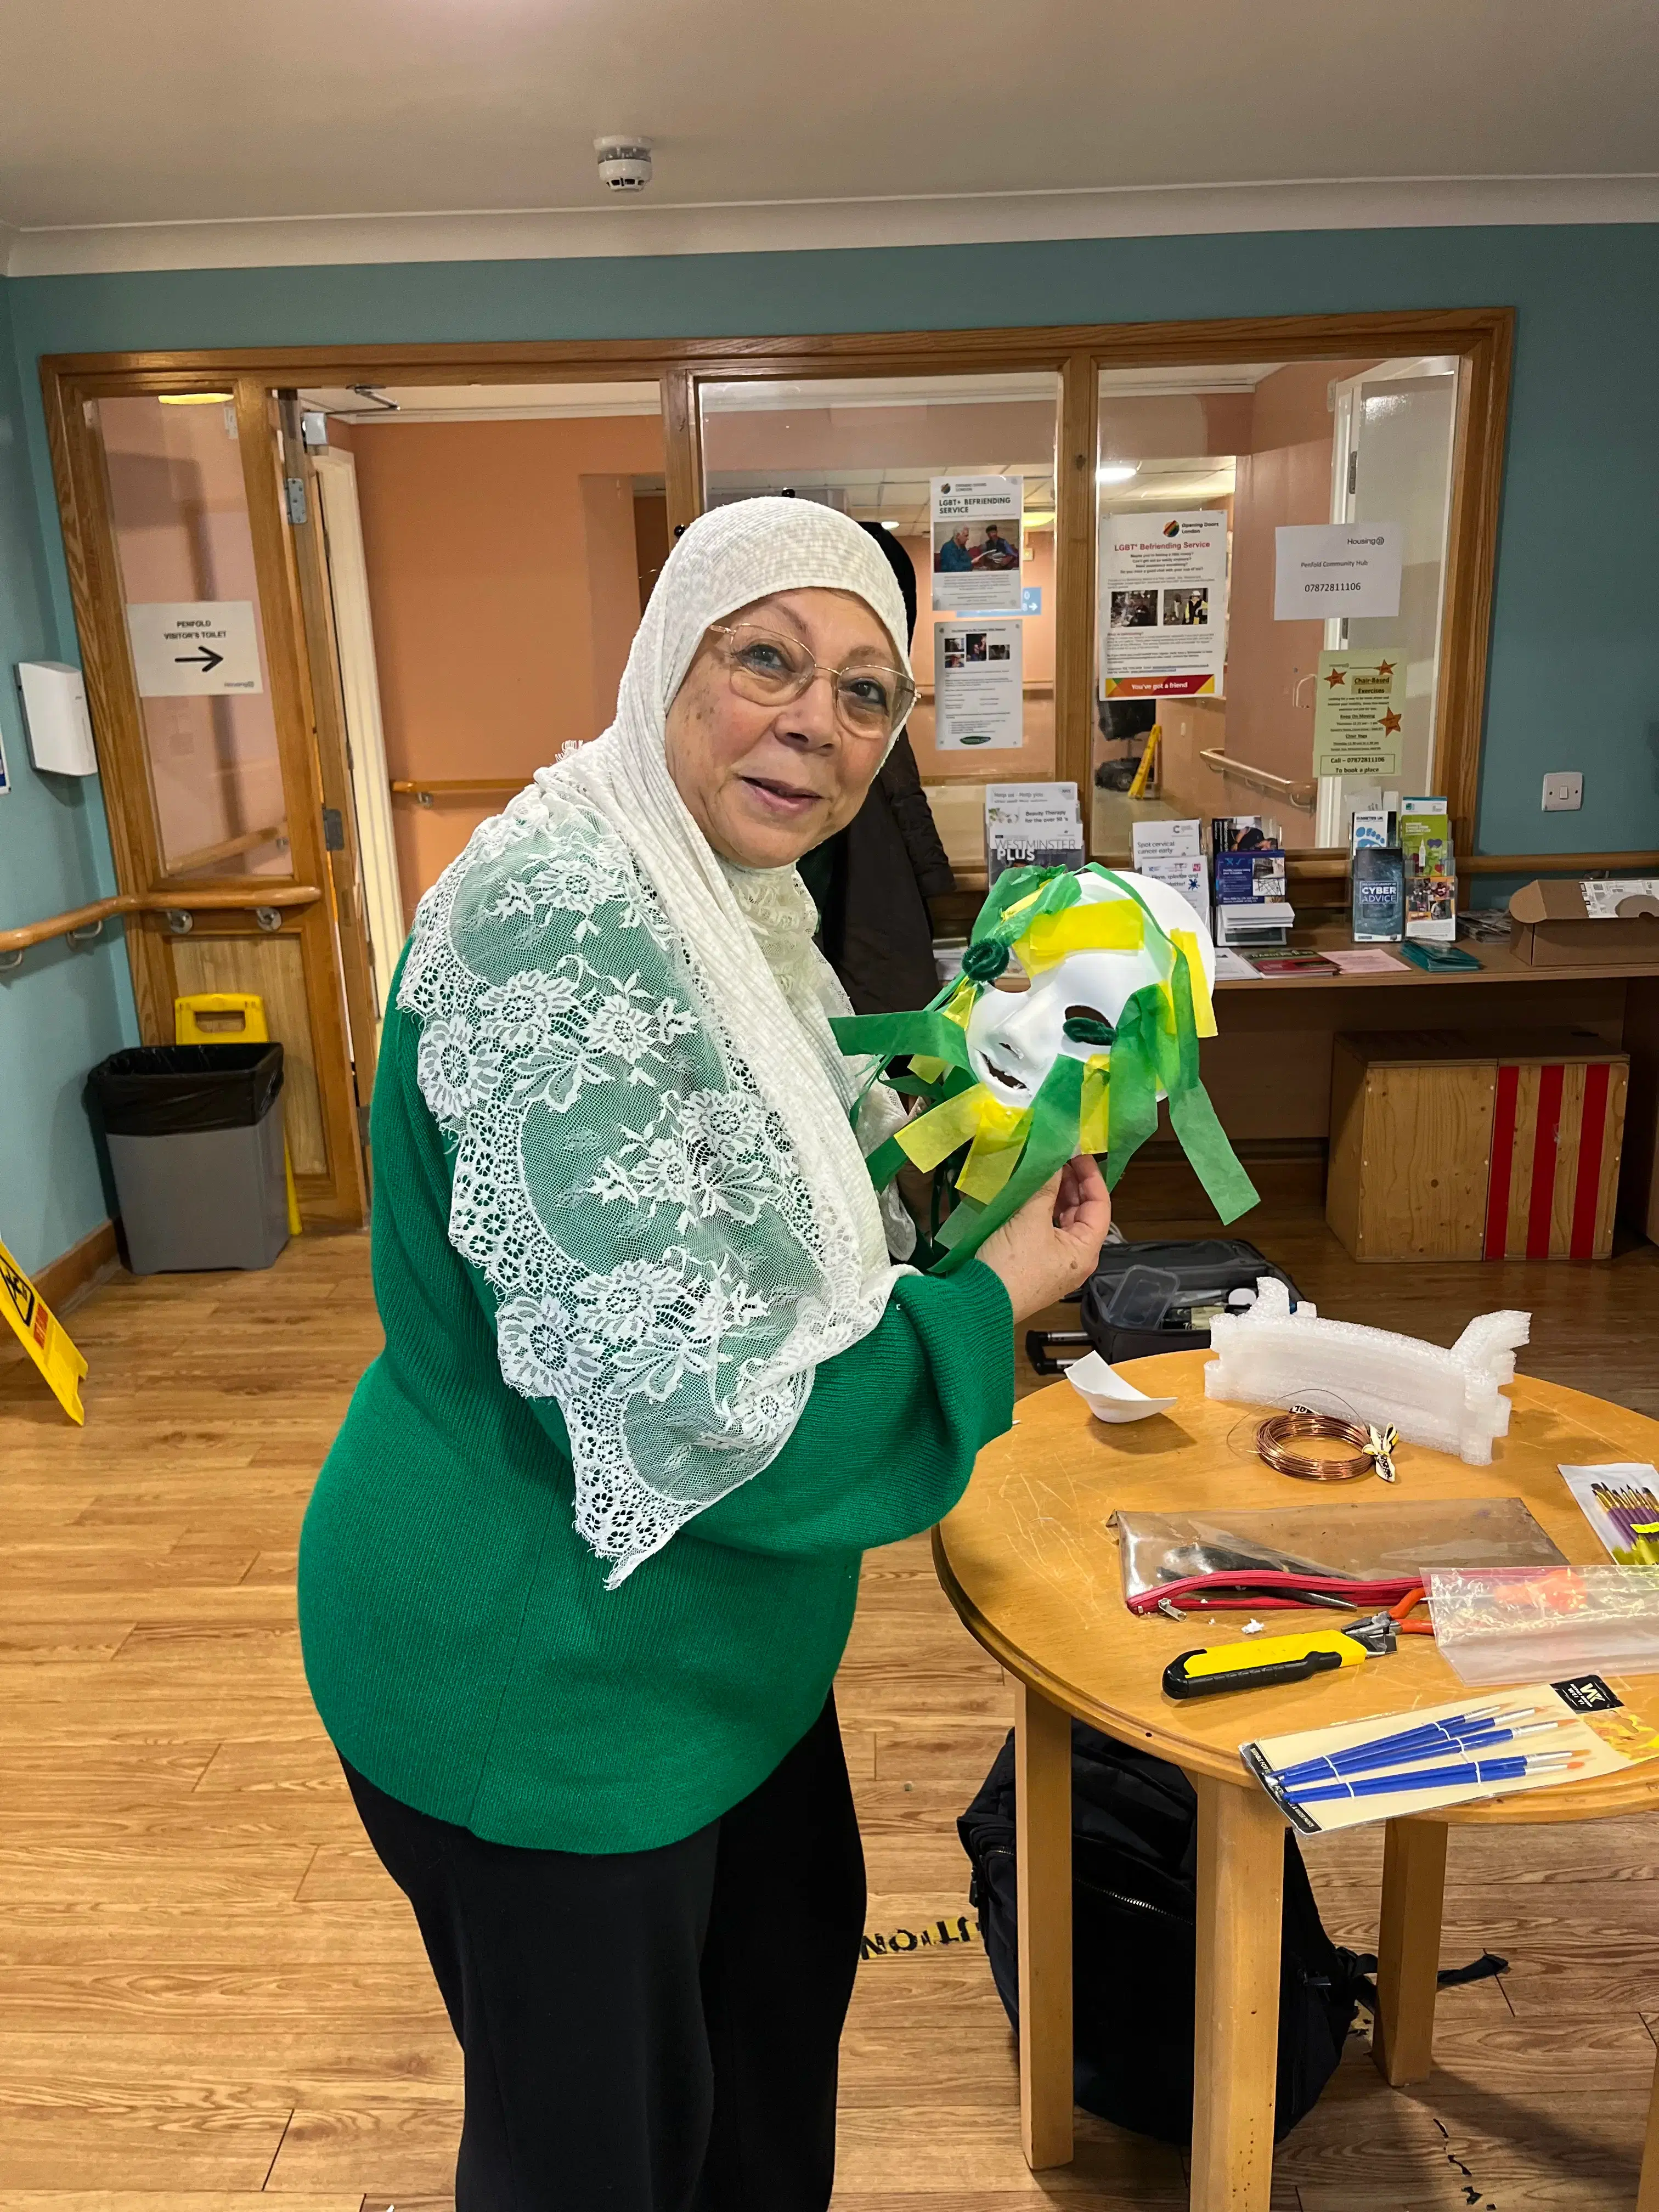 A smiling woman in a green sweater and white lace headscarf holding a colorful handcrafted item, standing in a room with informational flyers on the wall and various items on the table.